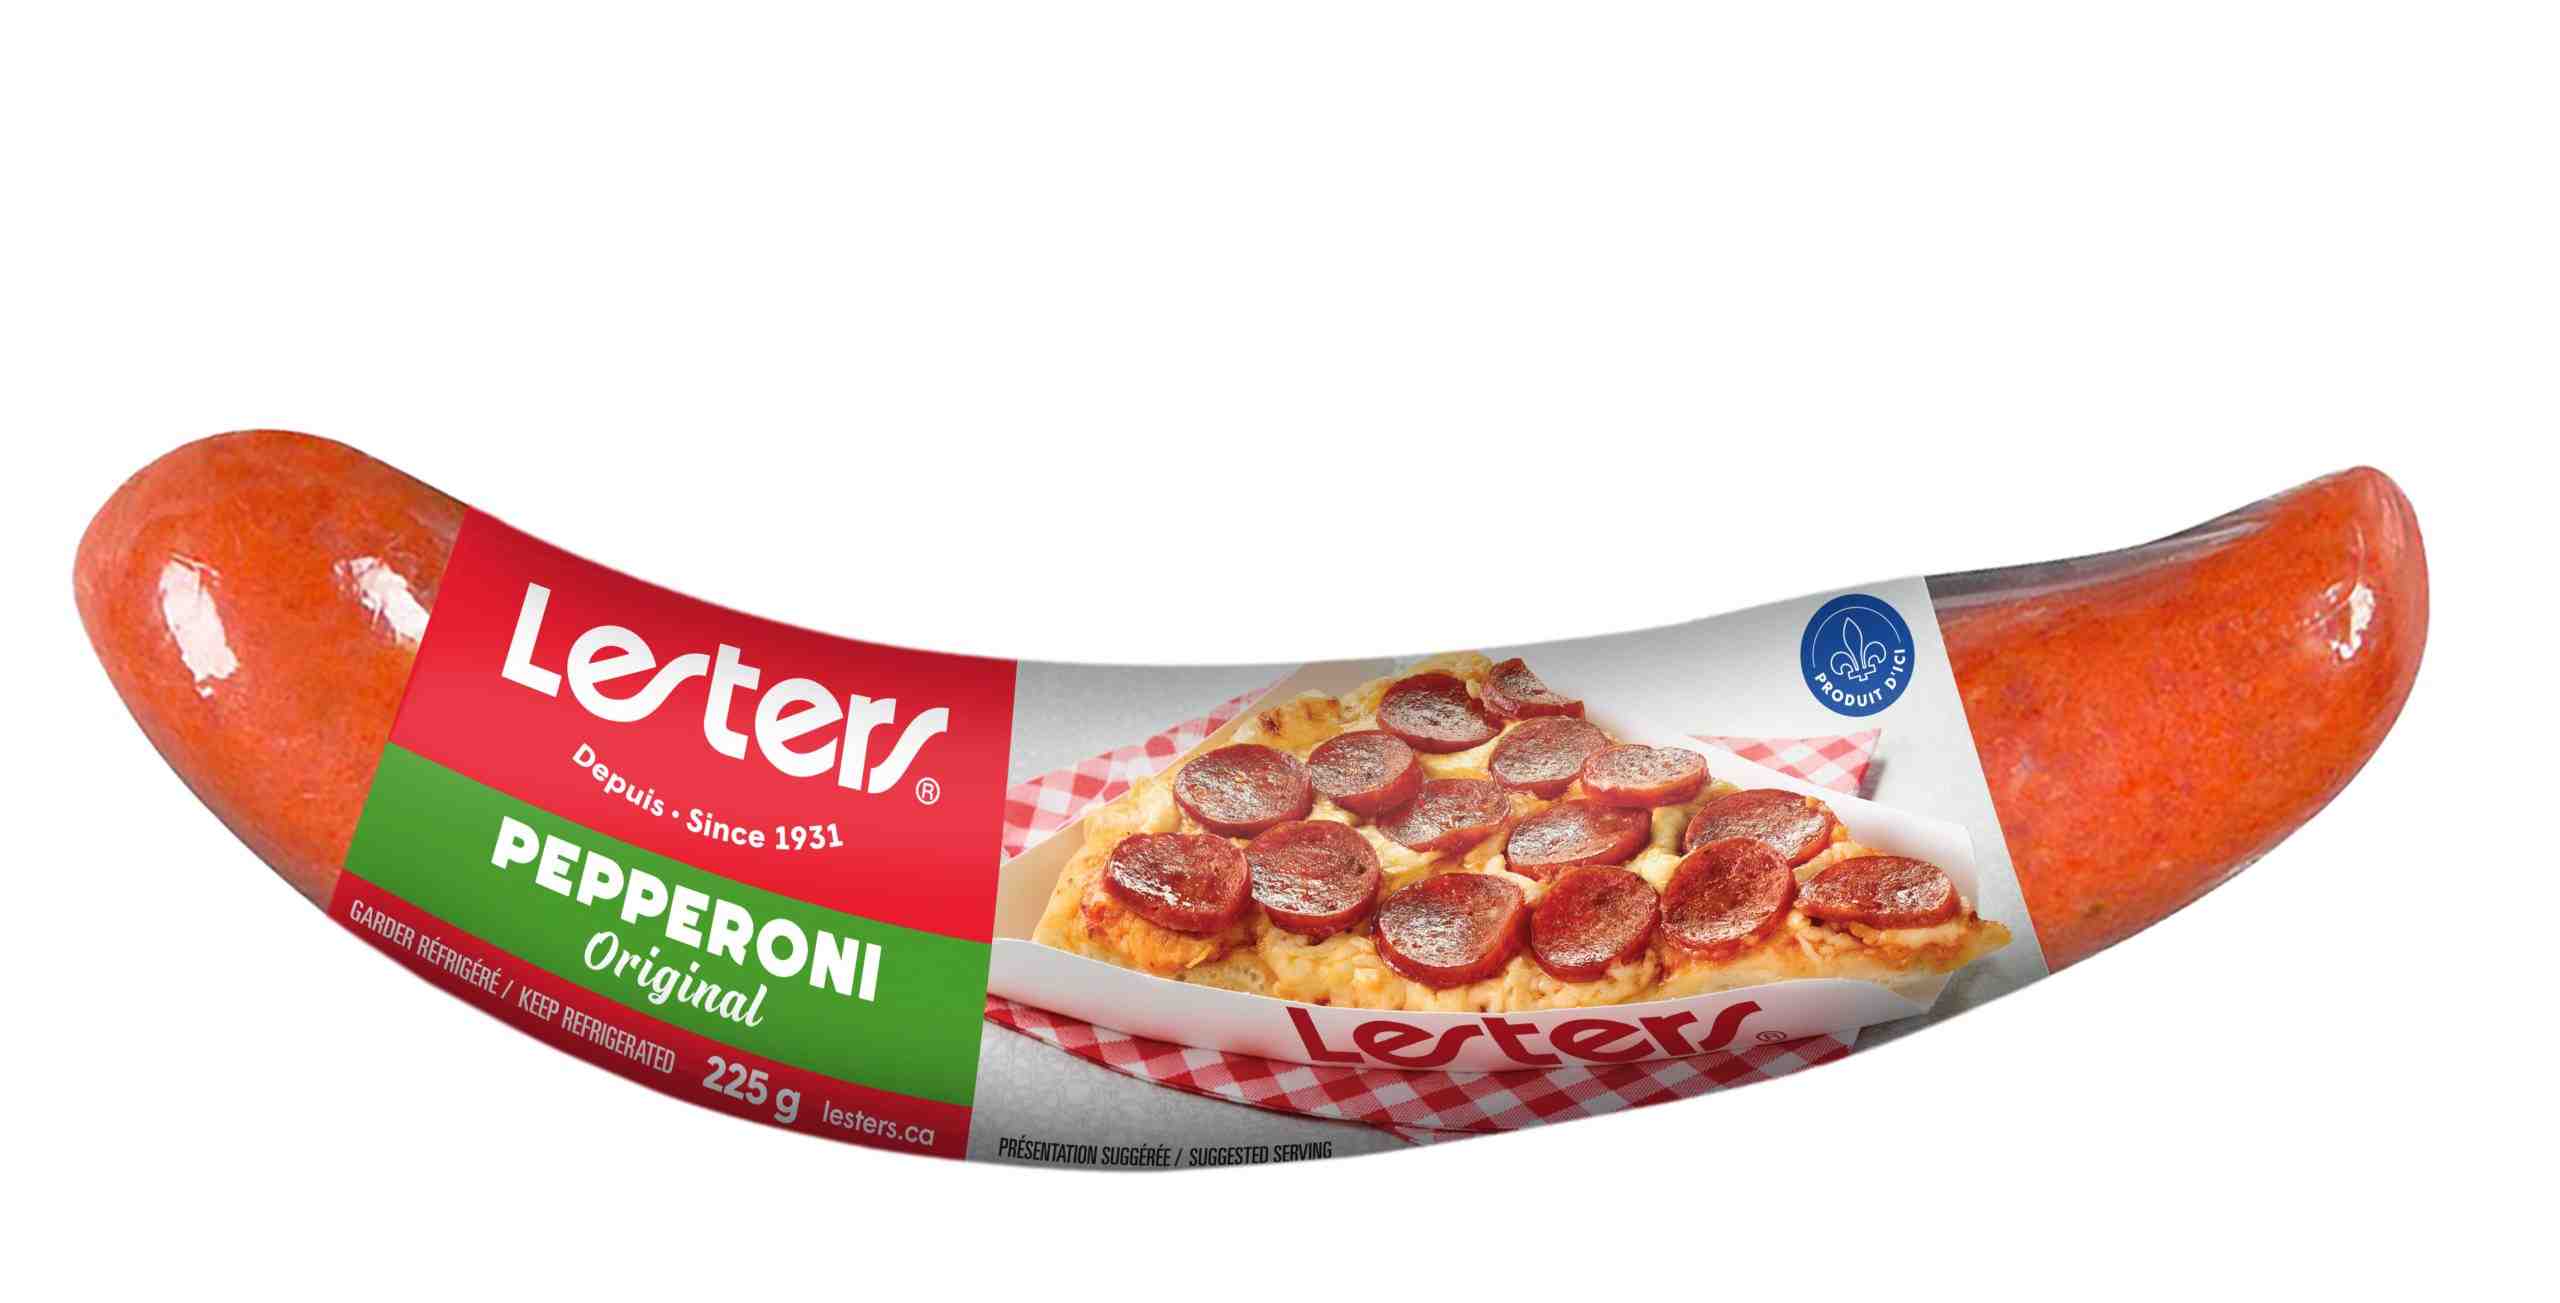 Why is salami called pepperoni?